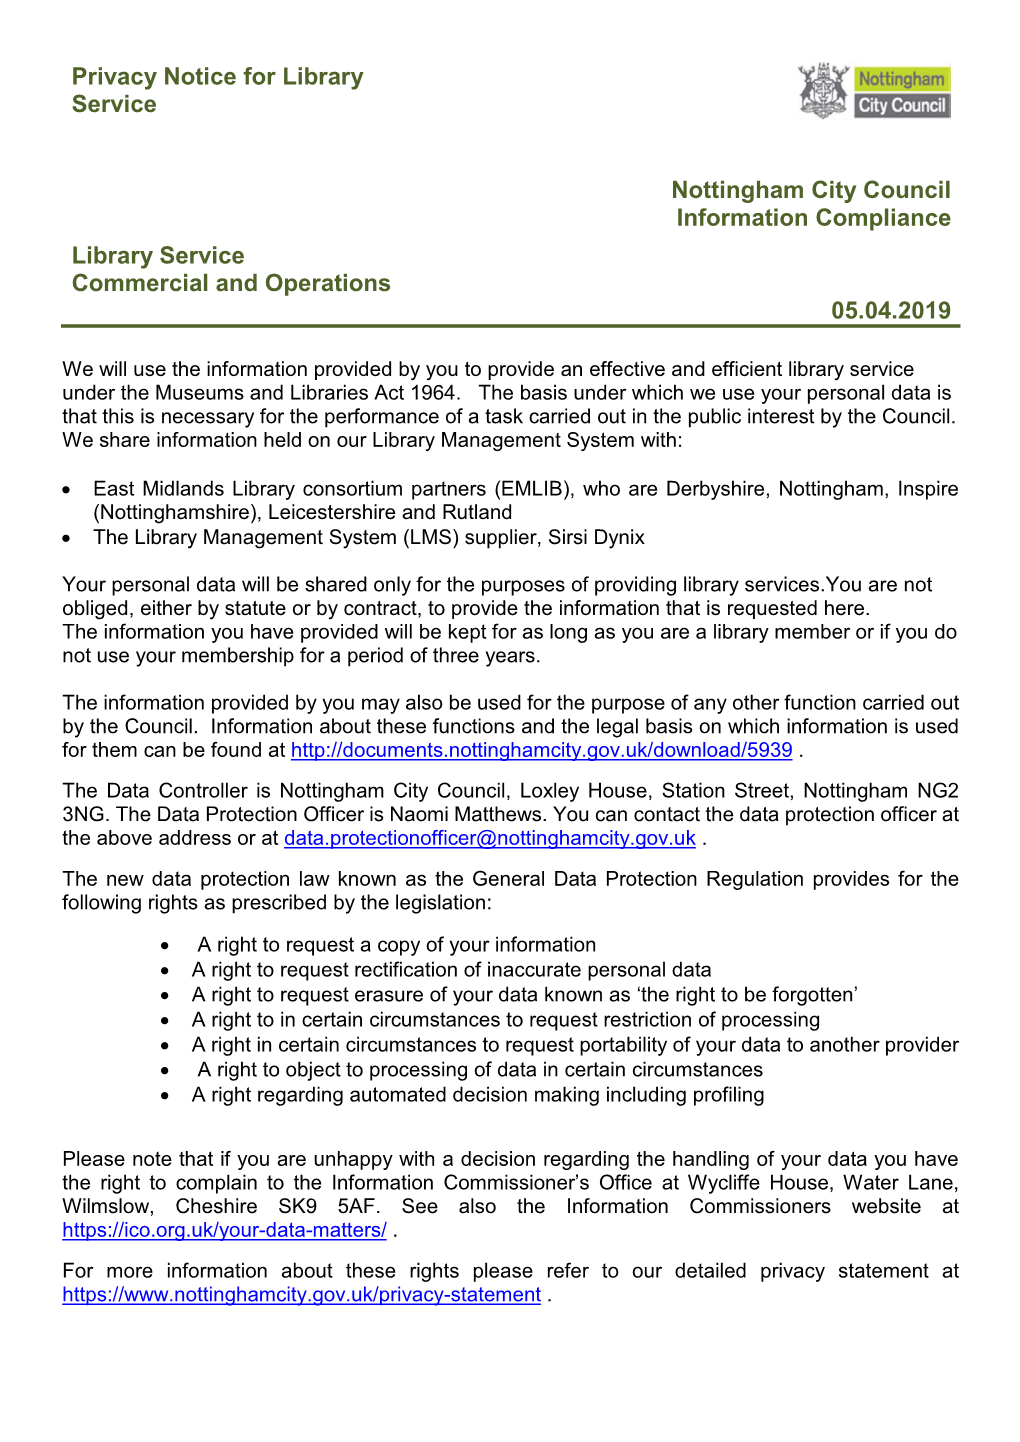 Privacy Notice for Library Service Nottingham City Council